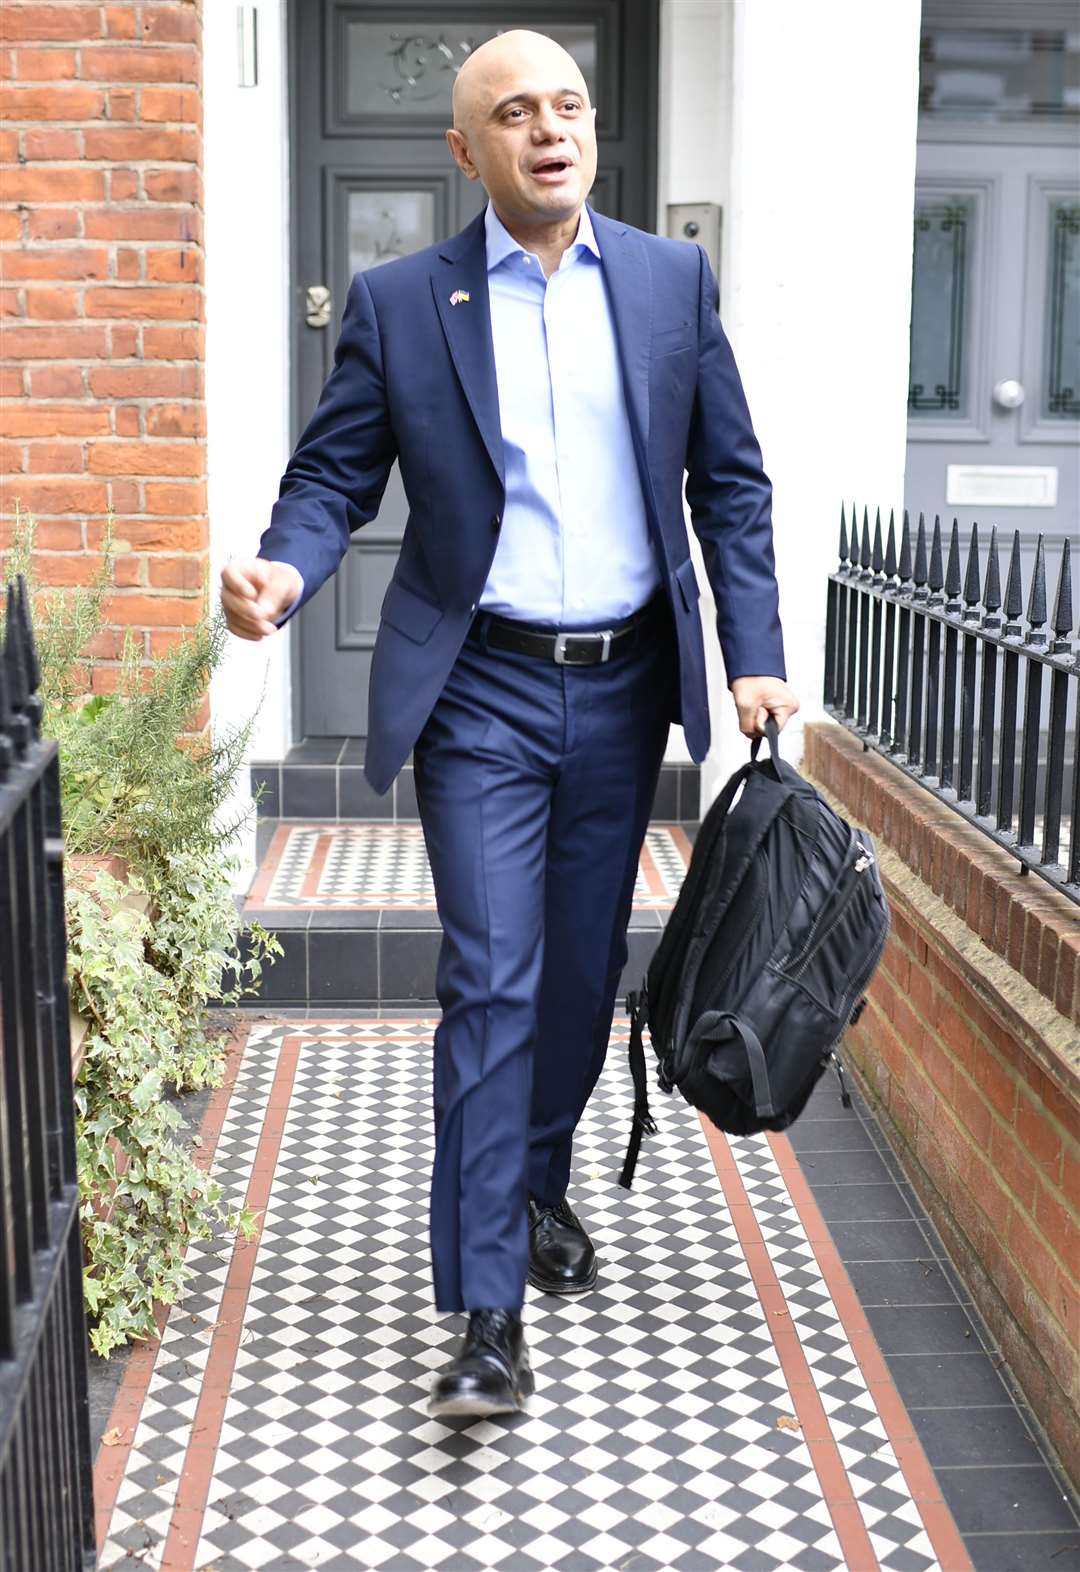 Former health secretary Sajid Javid leaves his home in south-west London on Wednesday morning (Beresford Hodge/PA)